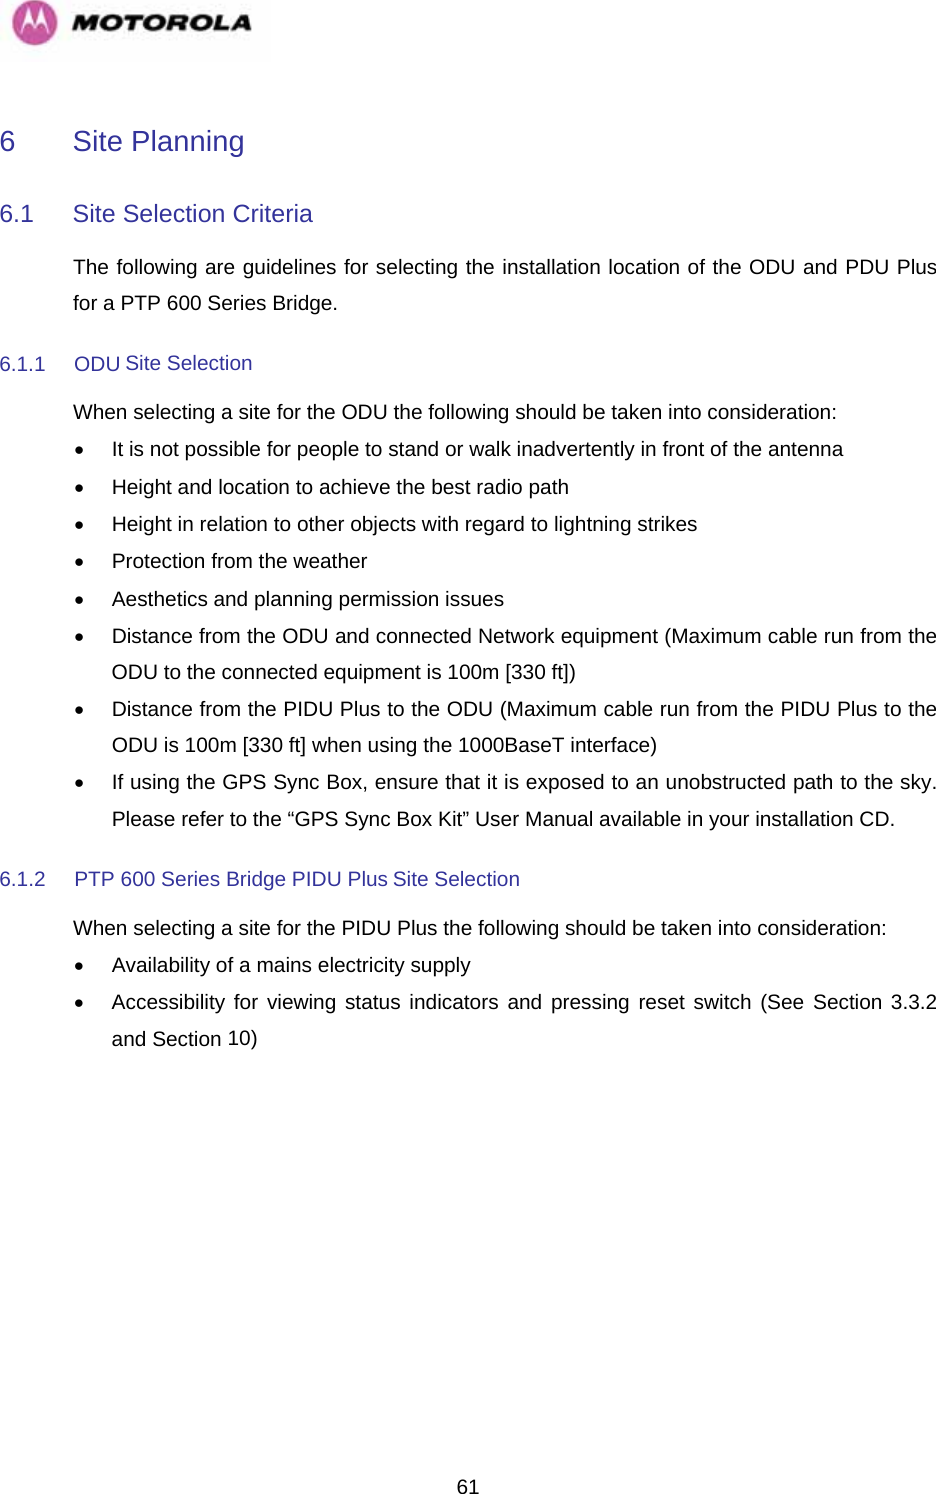   616  Site Planning  6.1  Site Selection Criteria  The following are guidelines for selecting the installation location of the ODU and PDU Plus for a PTP 600 Series Bridge.  6.1.1 ODU Site Selection  When selecting a site for the ODU the following should be taken into consideration:  •  It is not possible for people to stand or walk inadvertently in front of the antenna  •  Height and location to achieve the best radio path  •  Height in relation to other objects with regard to lightning strikes  •  Protection from the weather  •  Aesthetics and planning permission issues  •  Distance from the ODU and connected Network equipment (Maximum cable run from the ODU to the connected equipment is 100m [330 ft])  •  Distance from the PIDU Plus to the ODU (Maximum cable run from the PIDU Plus to the ODU is 100m [330 ft] when using the 1000BaseT interface)  •  If using the GPS Sync Box, ensure that it is exposed to an unobstructed path to the sky. Please refer to the “GPS Sync Box Kit” User Manual available in your installation CD. 6.1.2  PTP 600 Series Bridge PIDU Plus Site Selection  When selecting a site for the PIDU Plus the following should be taken into consideration:  •  Availability of a mains electricity supply  •  Accessibility for viewing status indicators and pressing reset switch (See Section 3.3.2 and Section 10)    